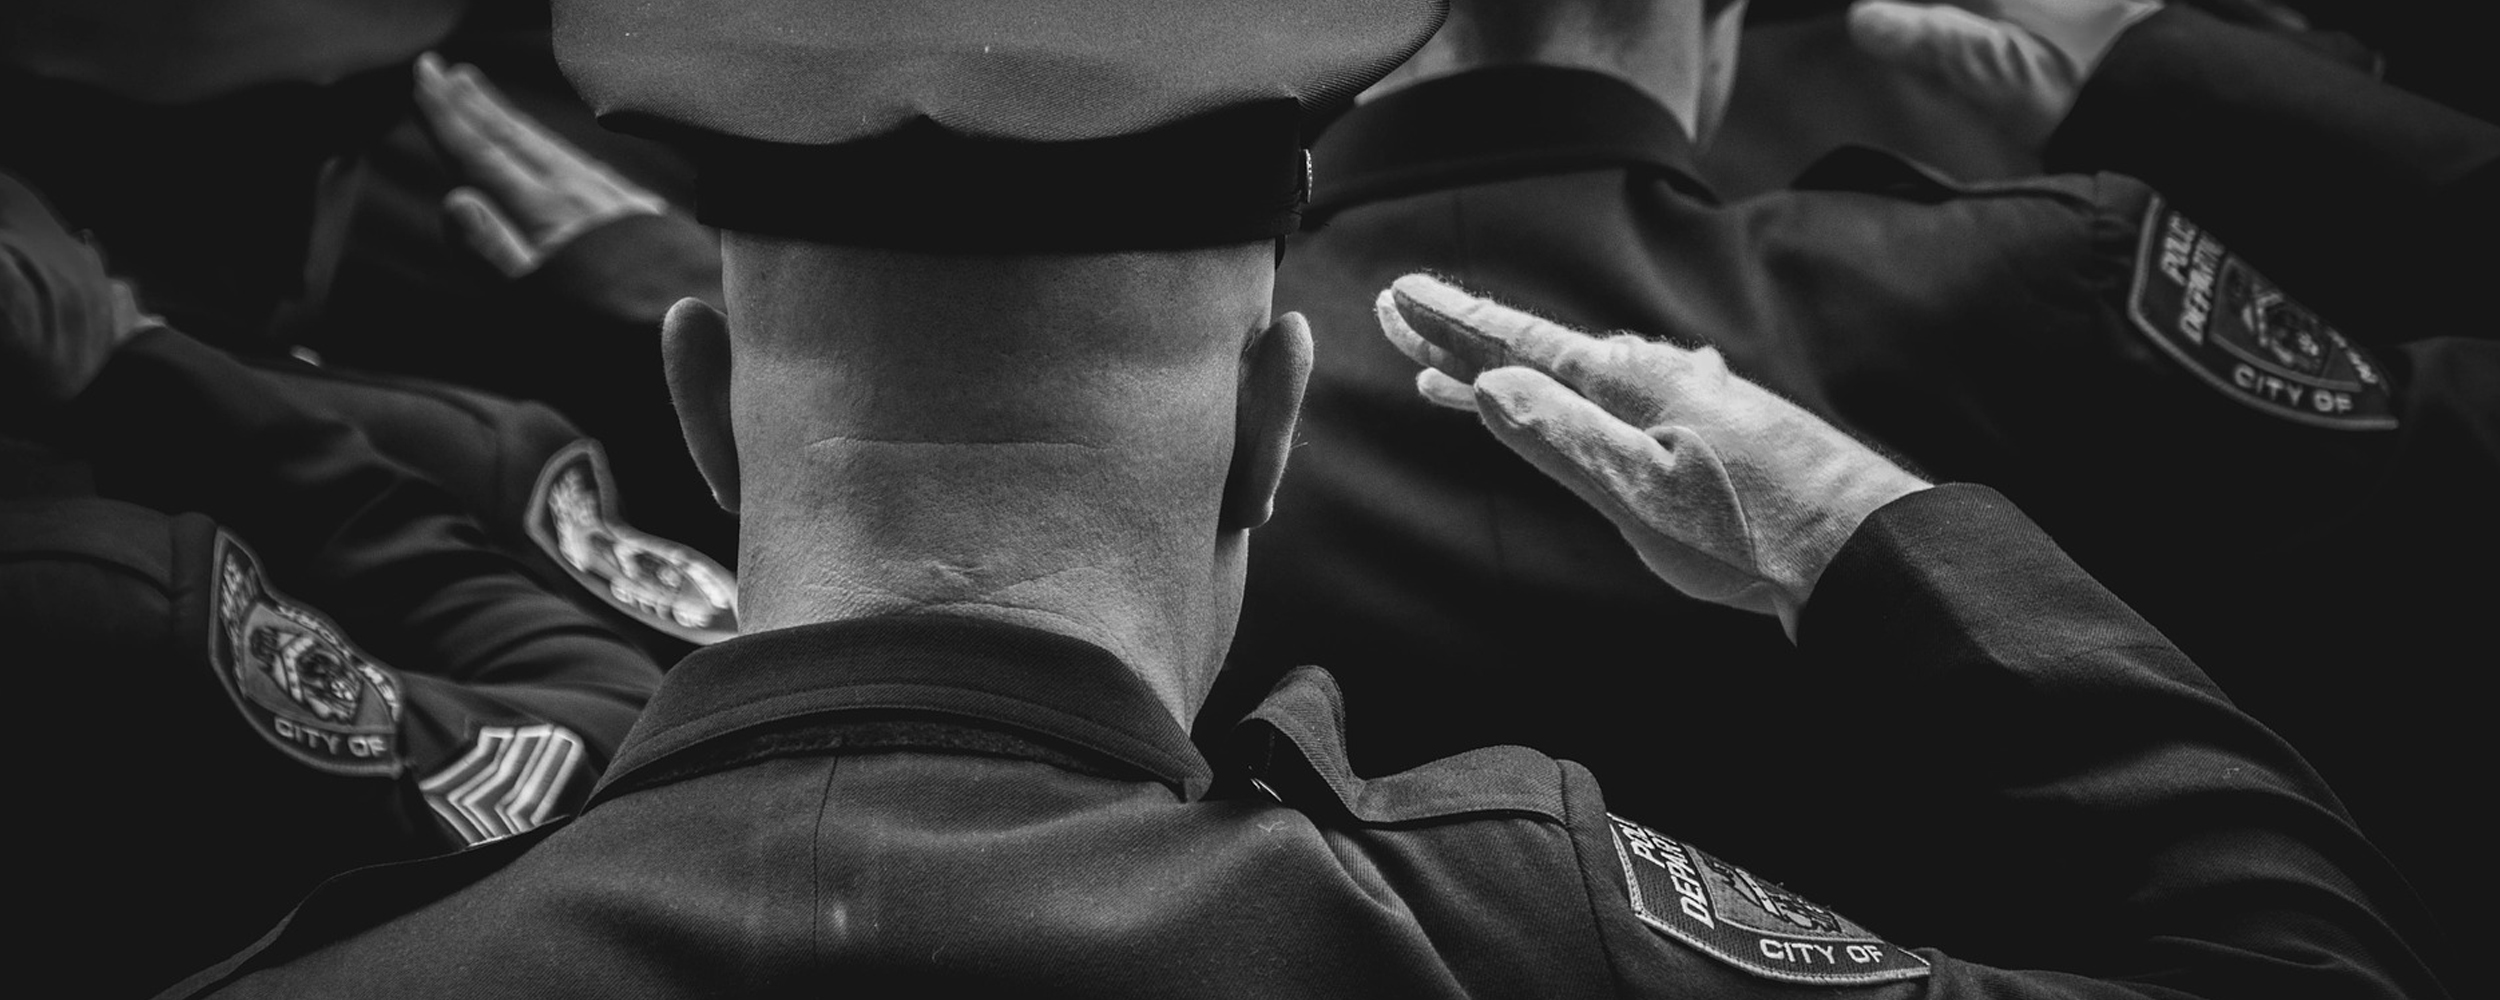 Becoming the Most Successful Police Training Officer